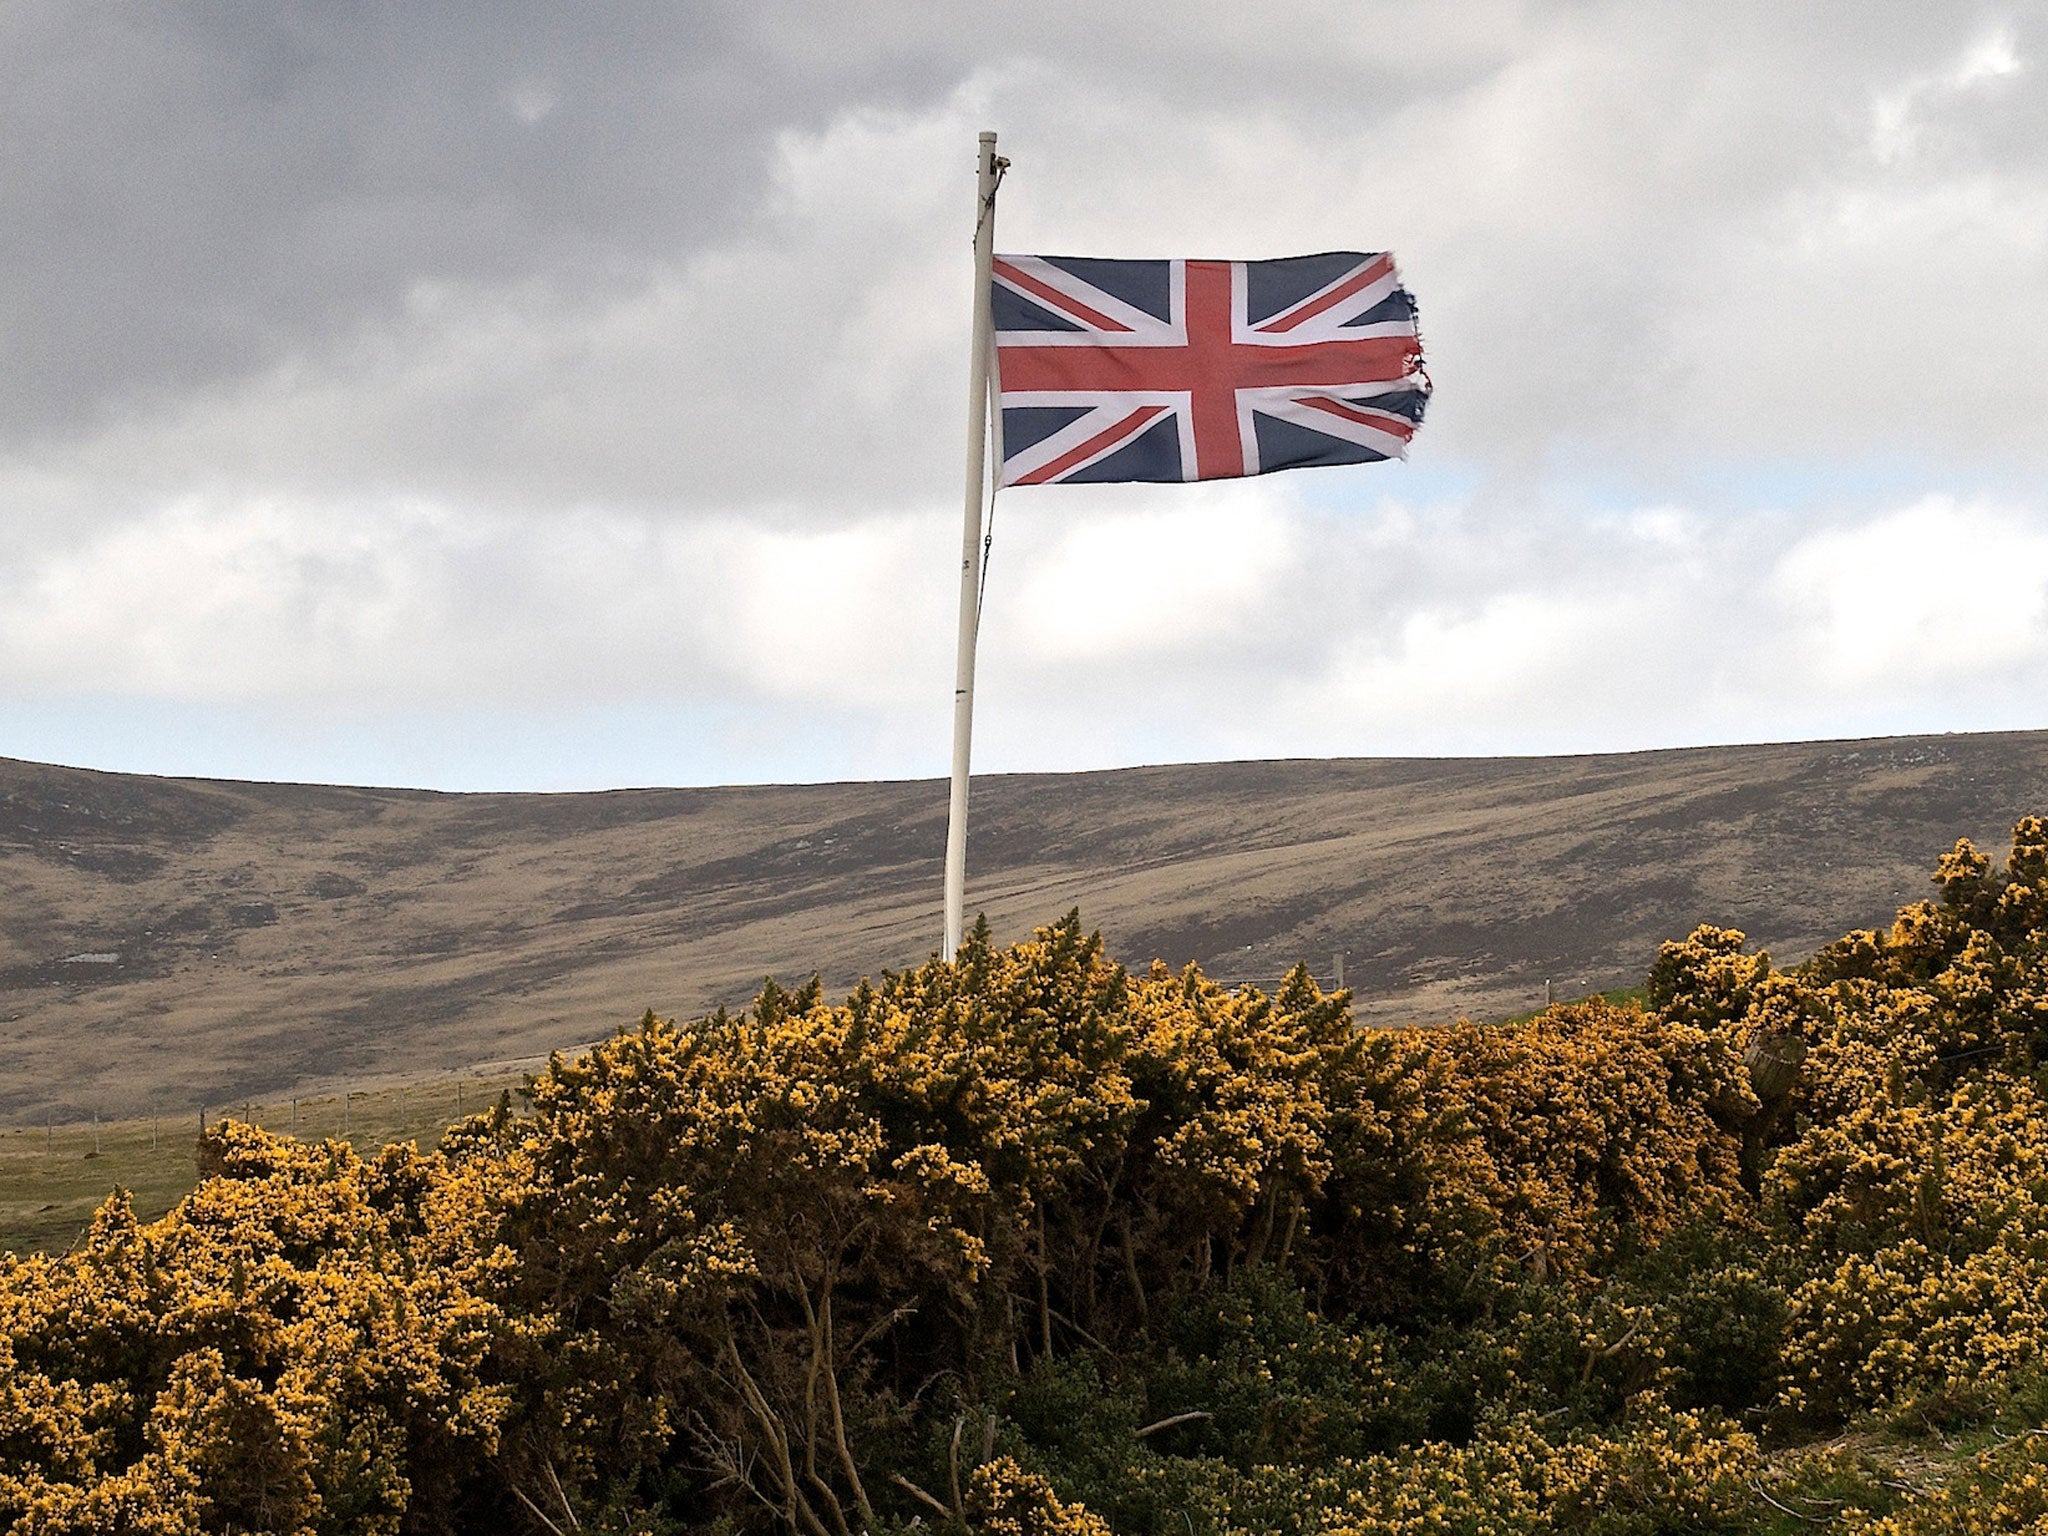 The Union Jack flying over the British War Cemetry at San Carlos in the Falkland Islands